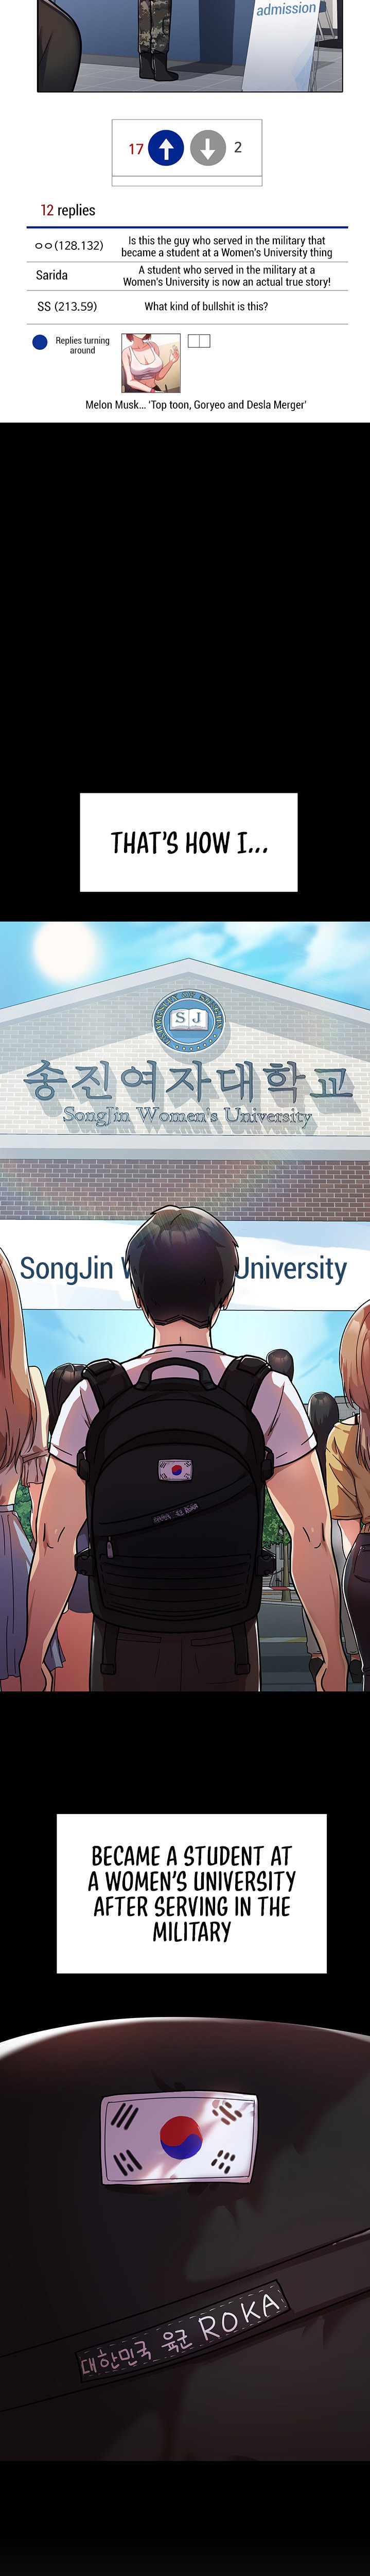 Women’s University Student who Served in the Military - Chapter 1 Page 9